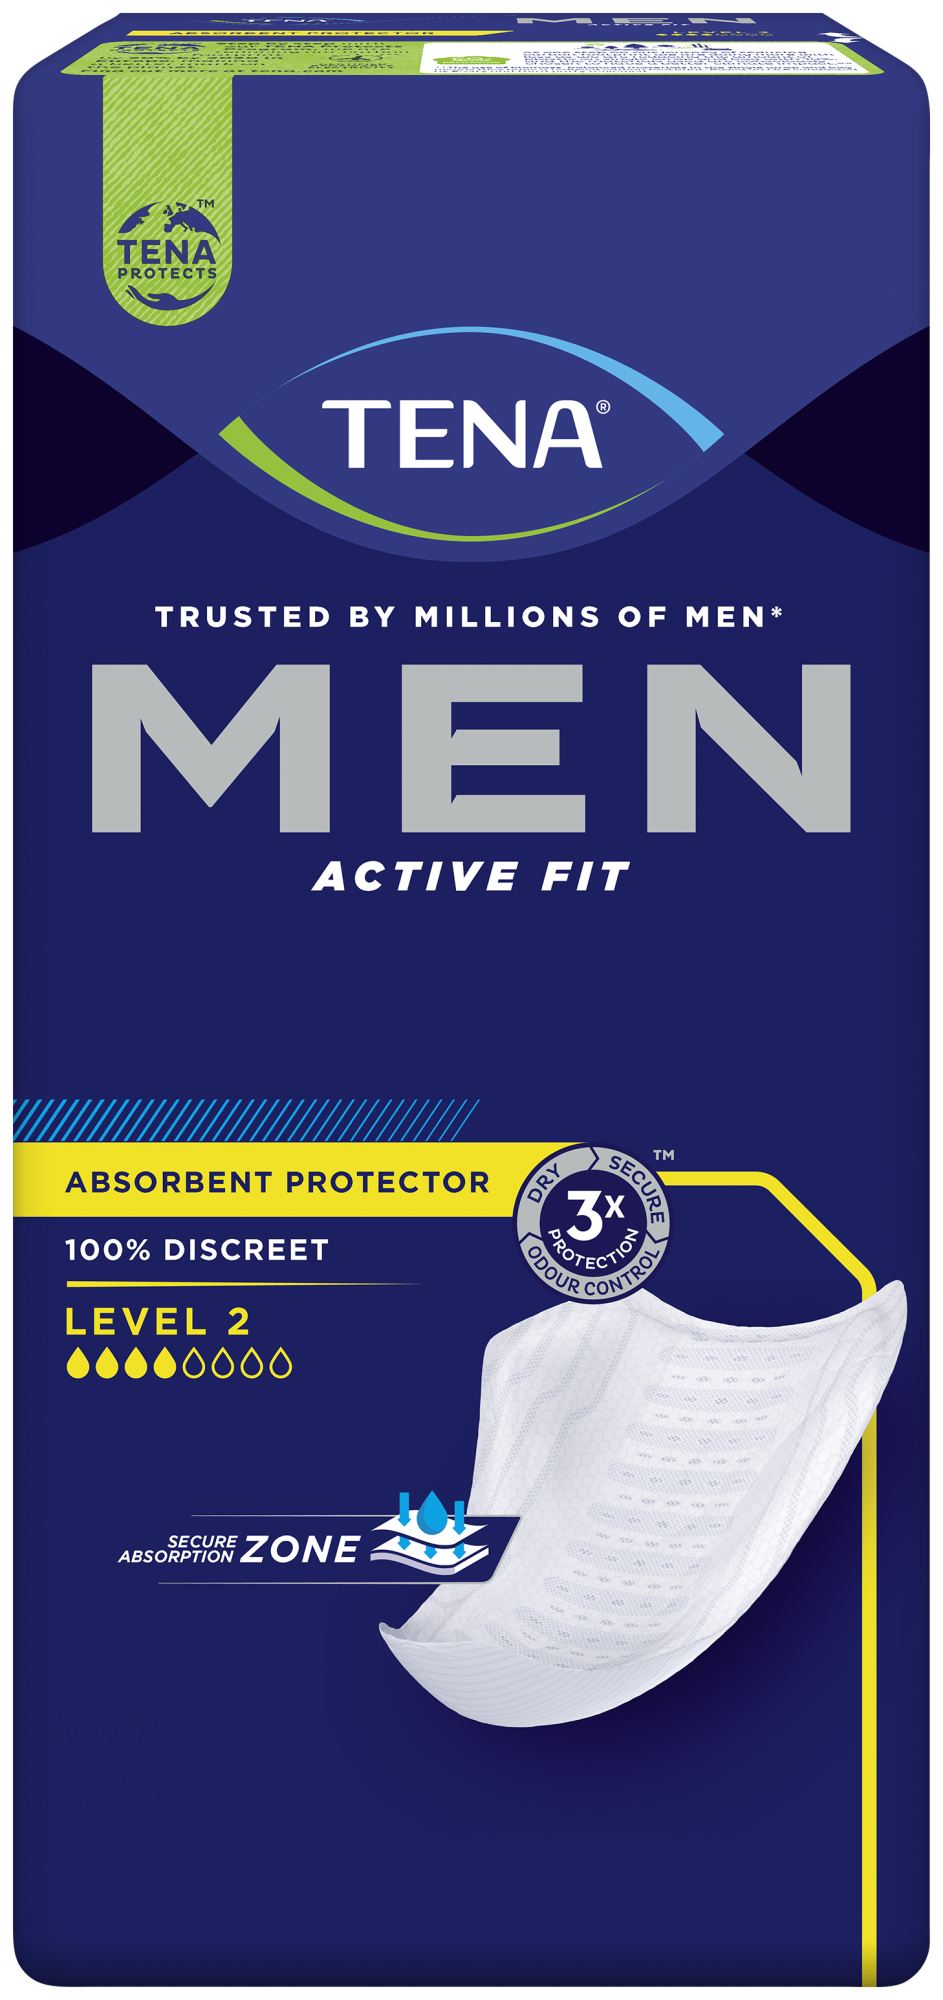 TENA Men Active Fit Absorbent Protector Level 2 | Incontinence pad